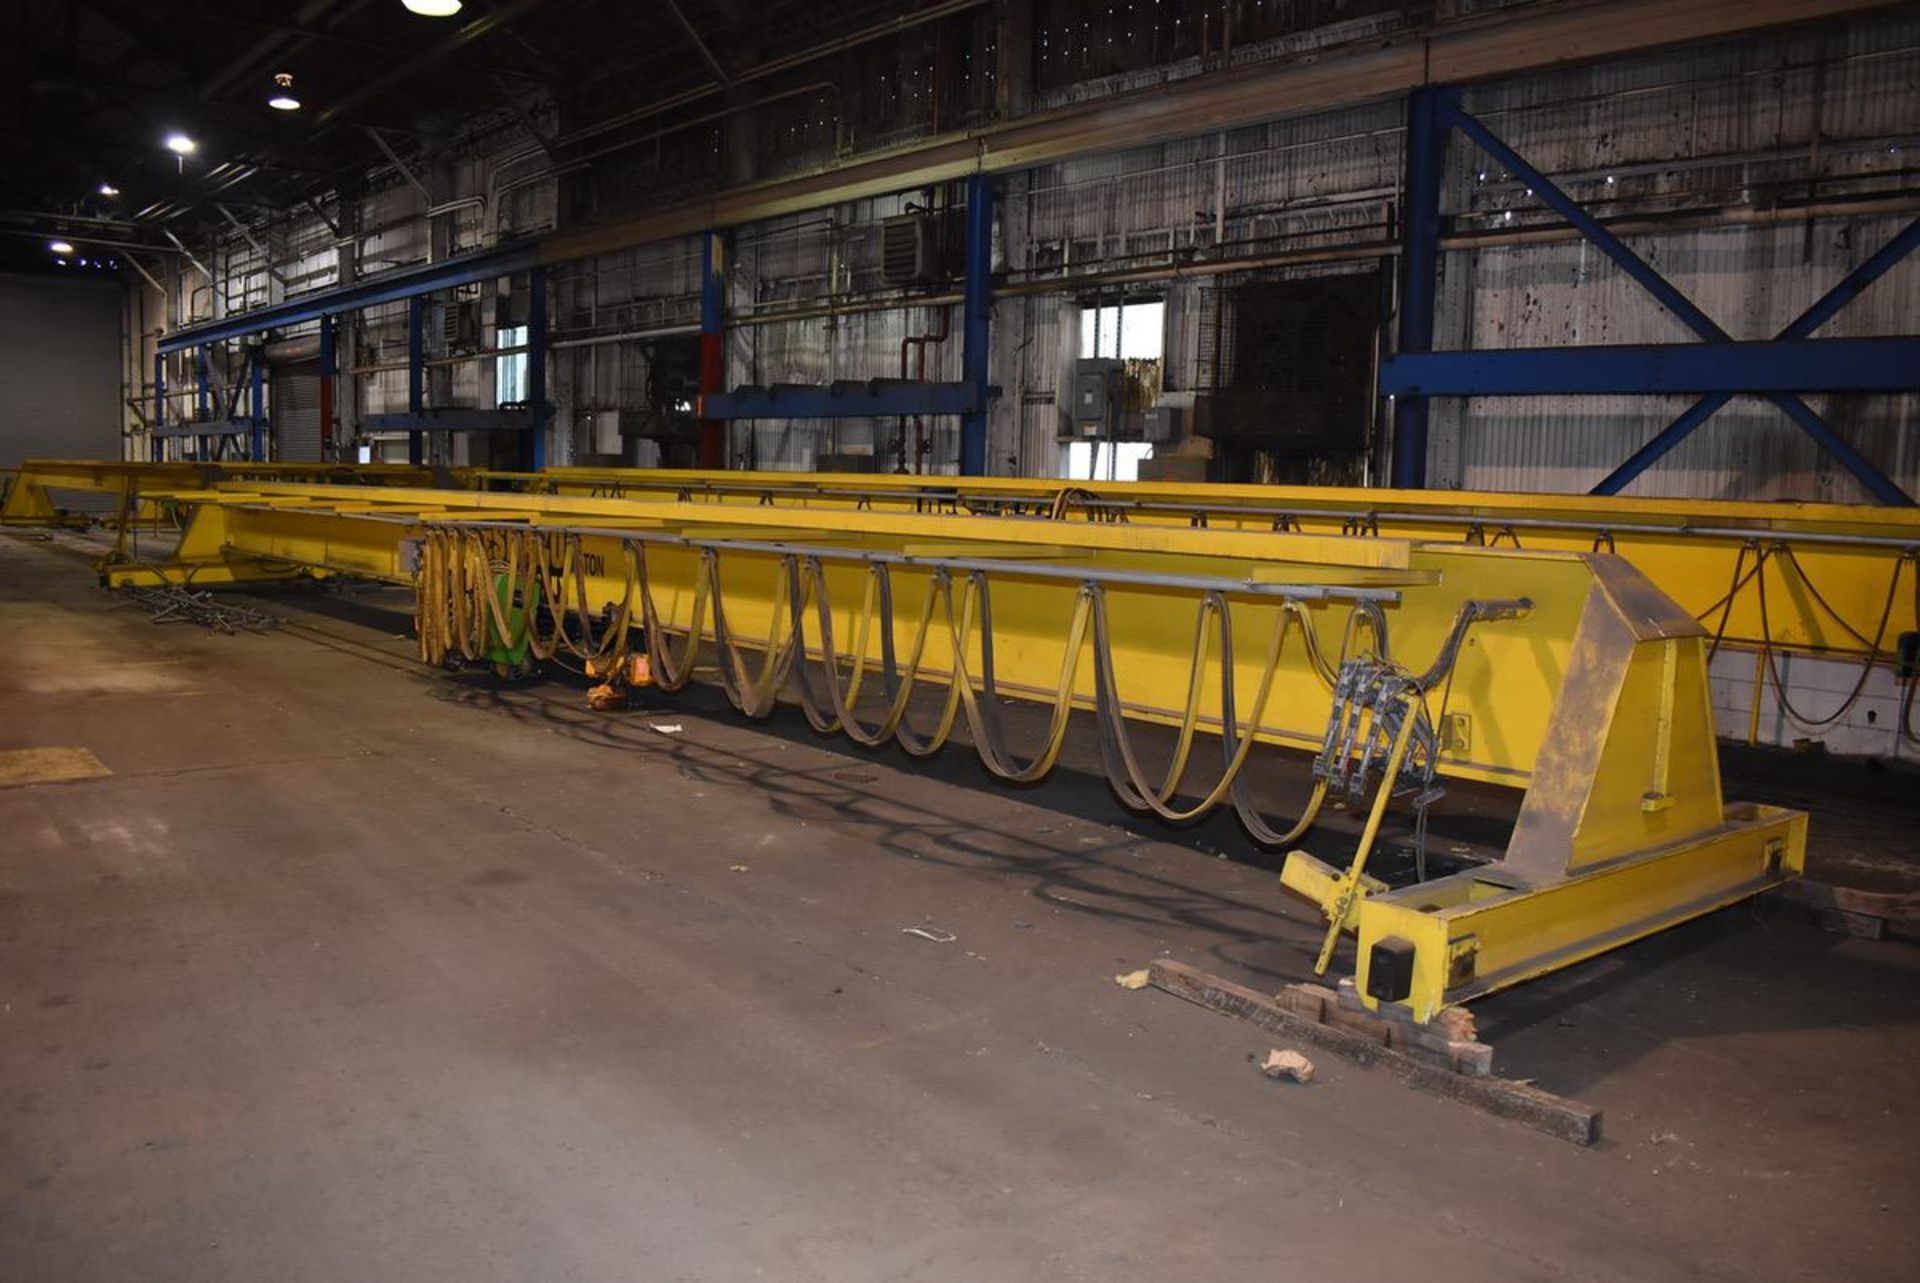 2007 DeShazo 10 Ton Bridge Crane with Stahl Hoist and Trolley, Approx 60ft Span, Over | Rig Fee $650 - Image 3 of 6